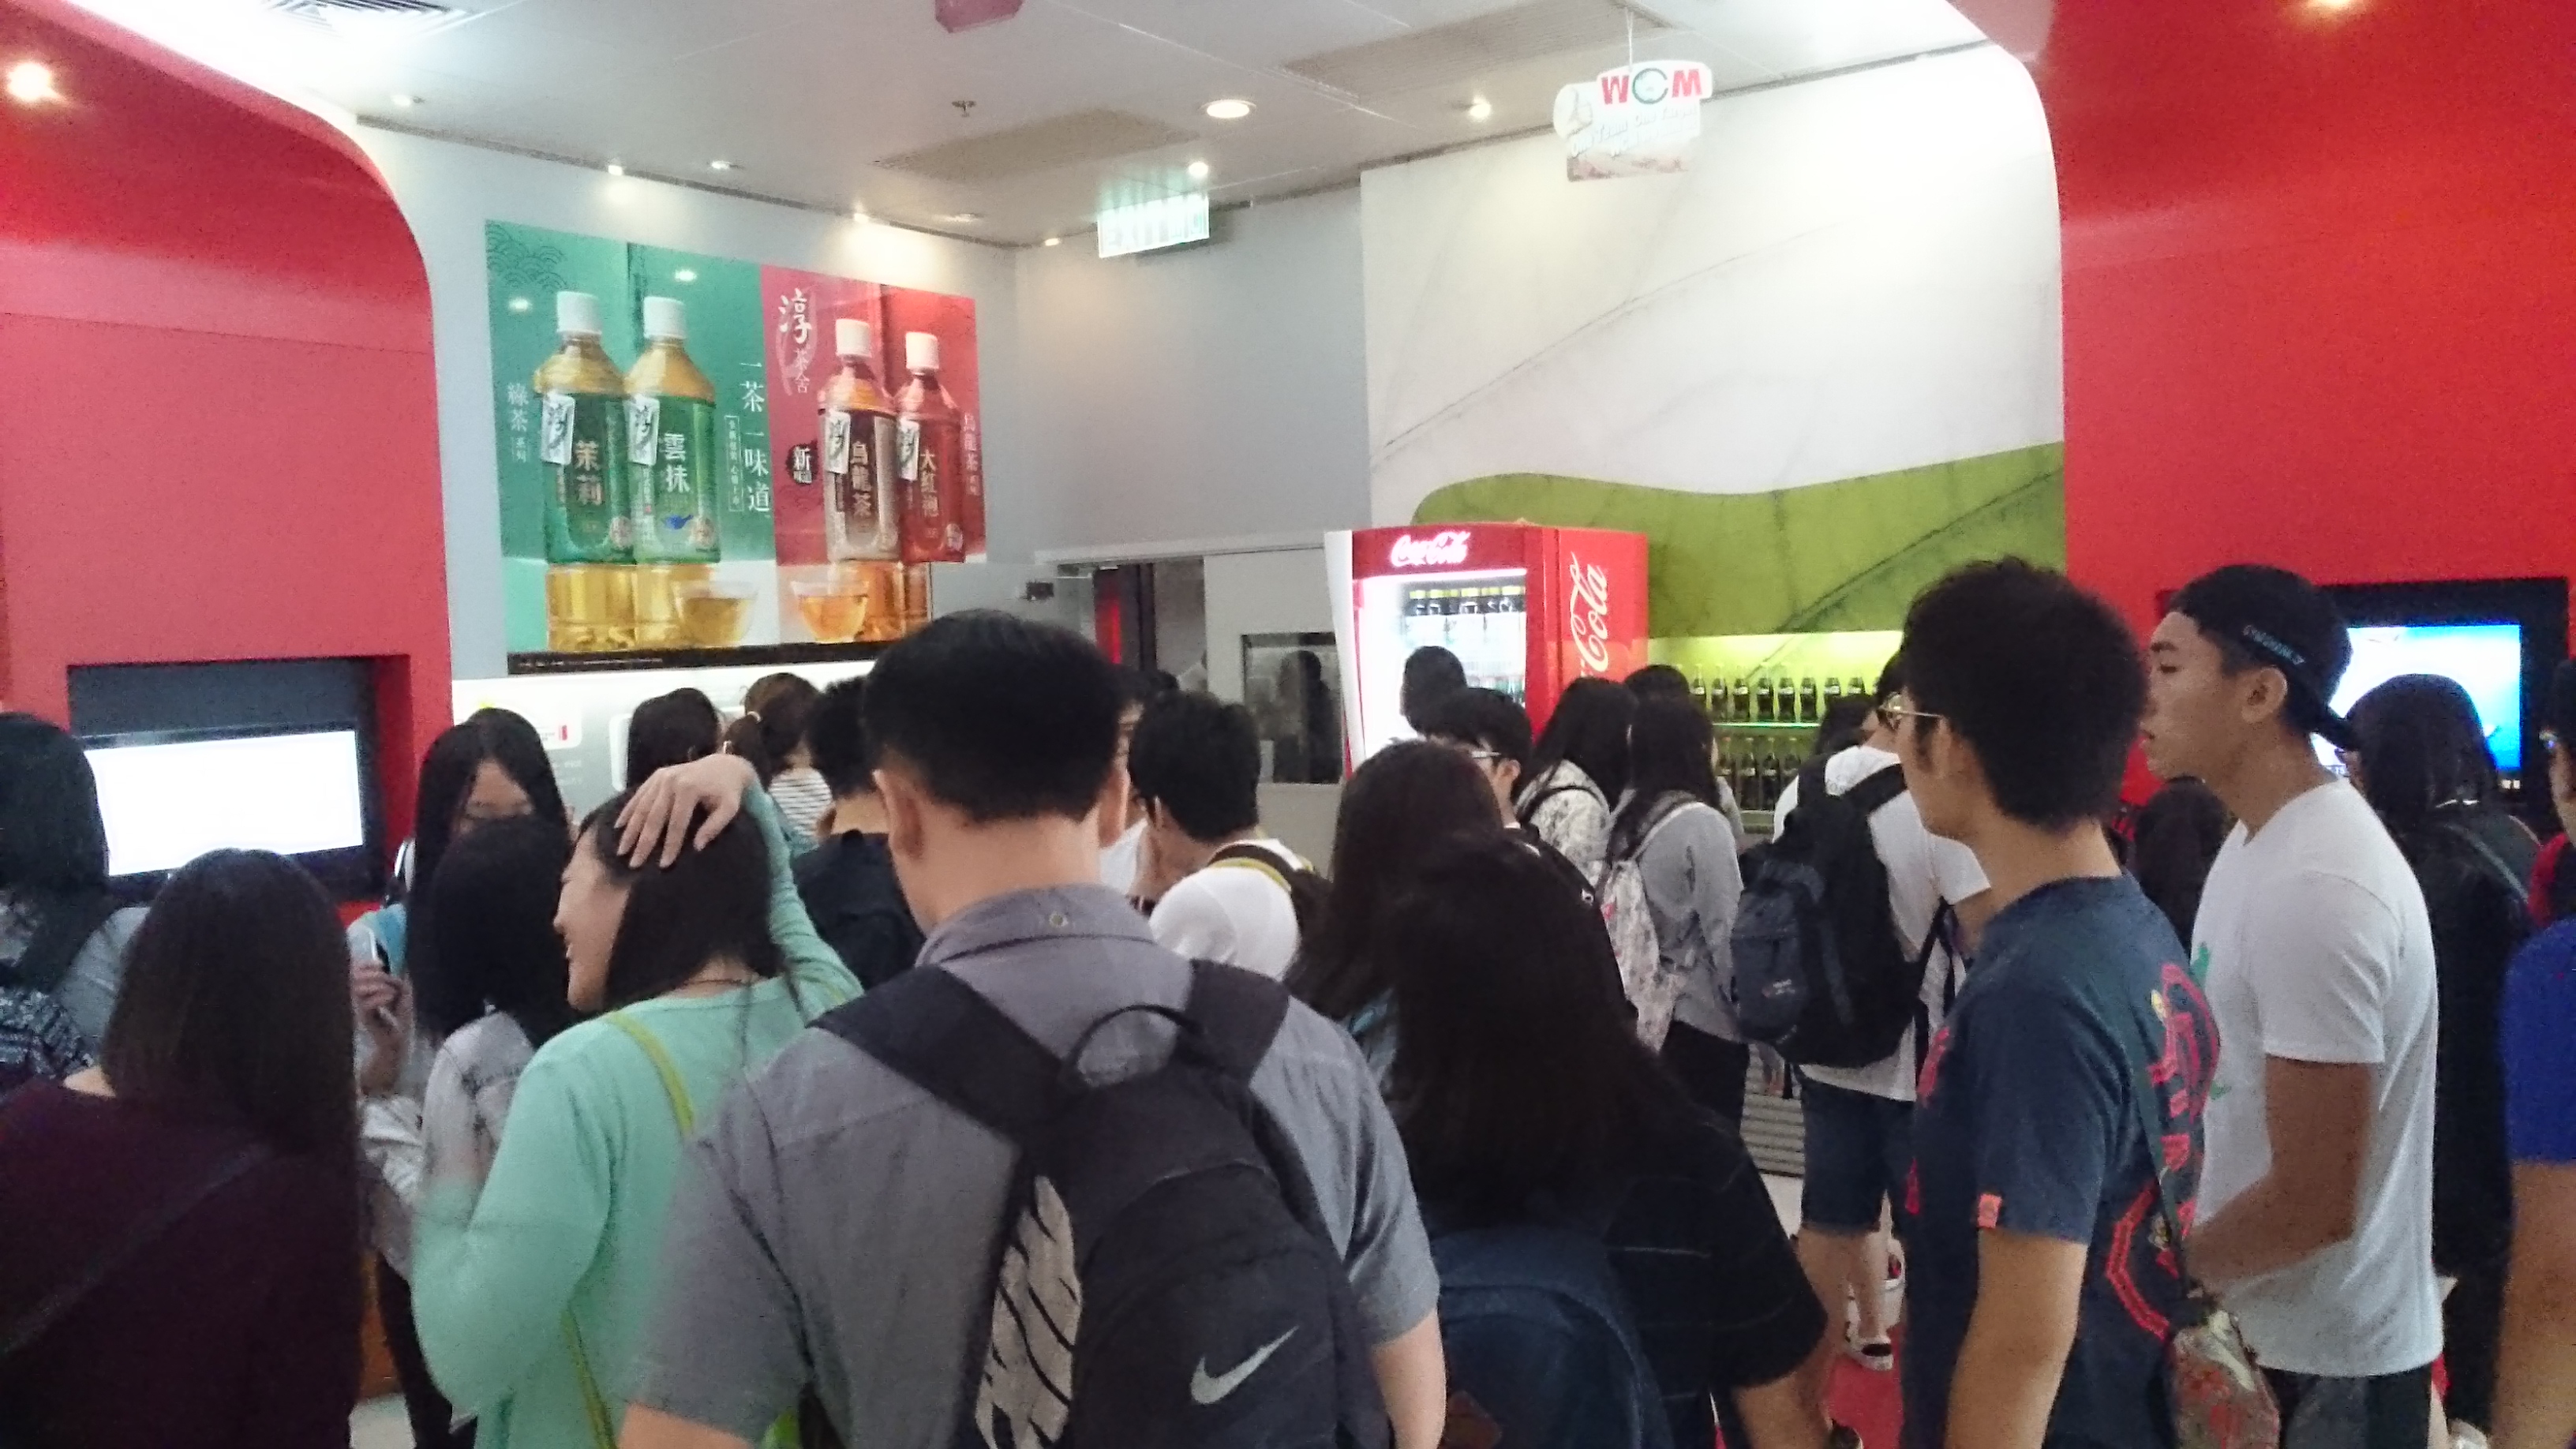 Visit to Swire Coca Cola HK in Shatin - Photo - 1